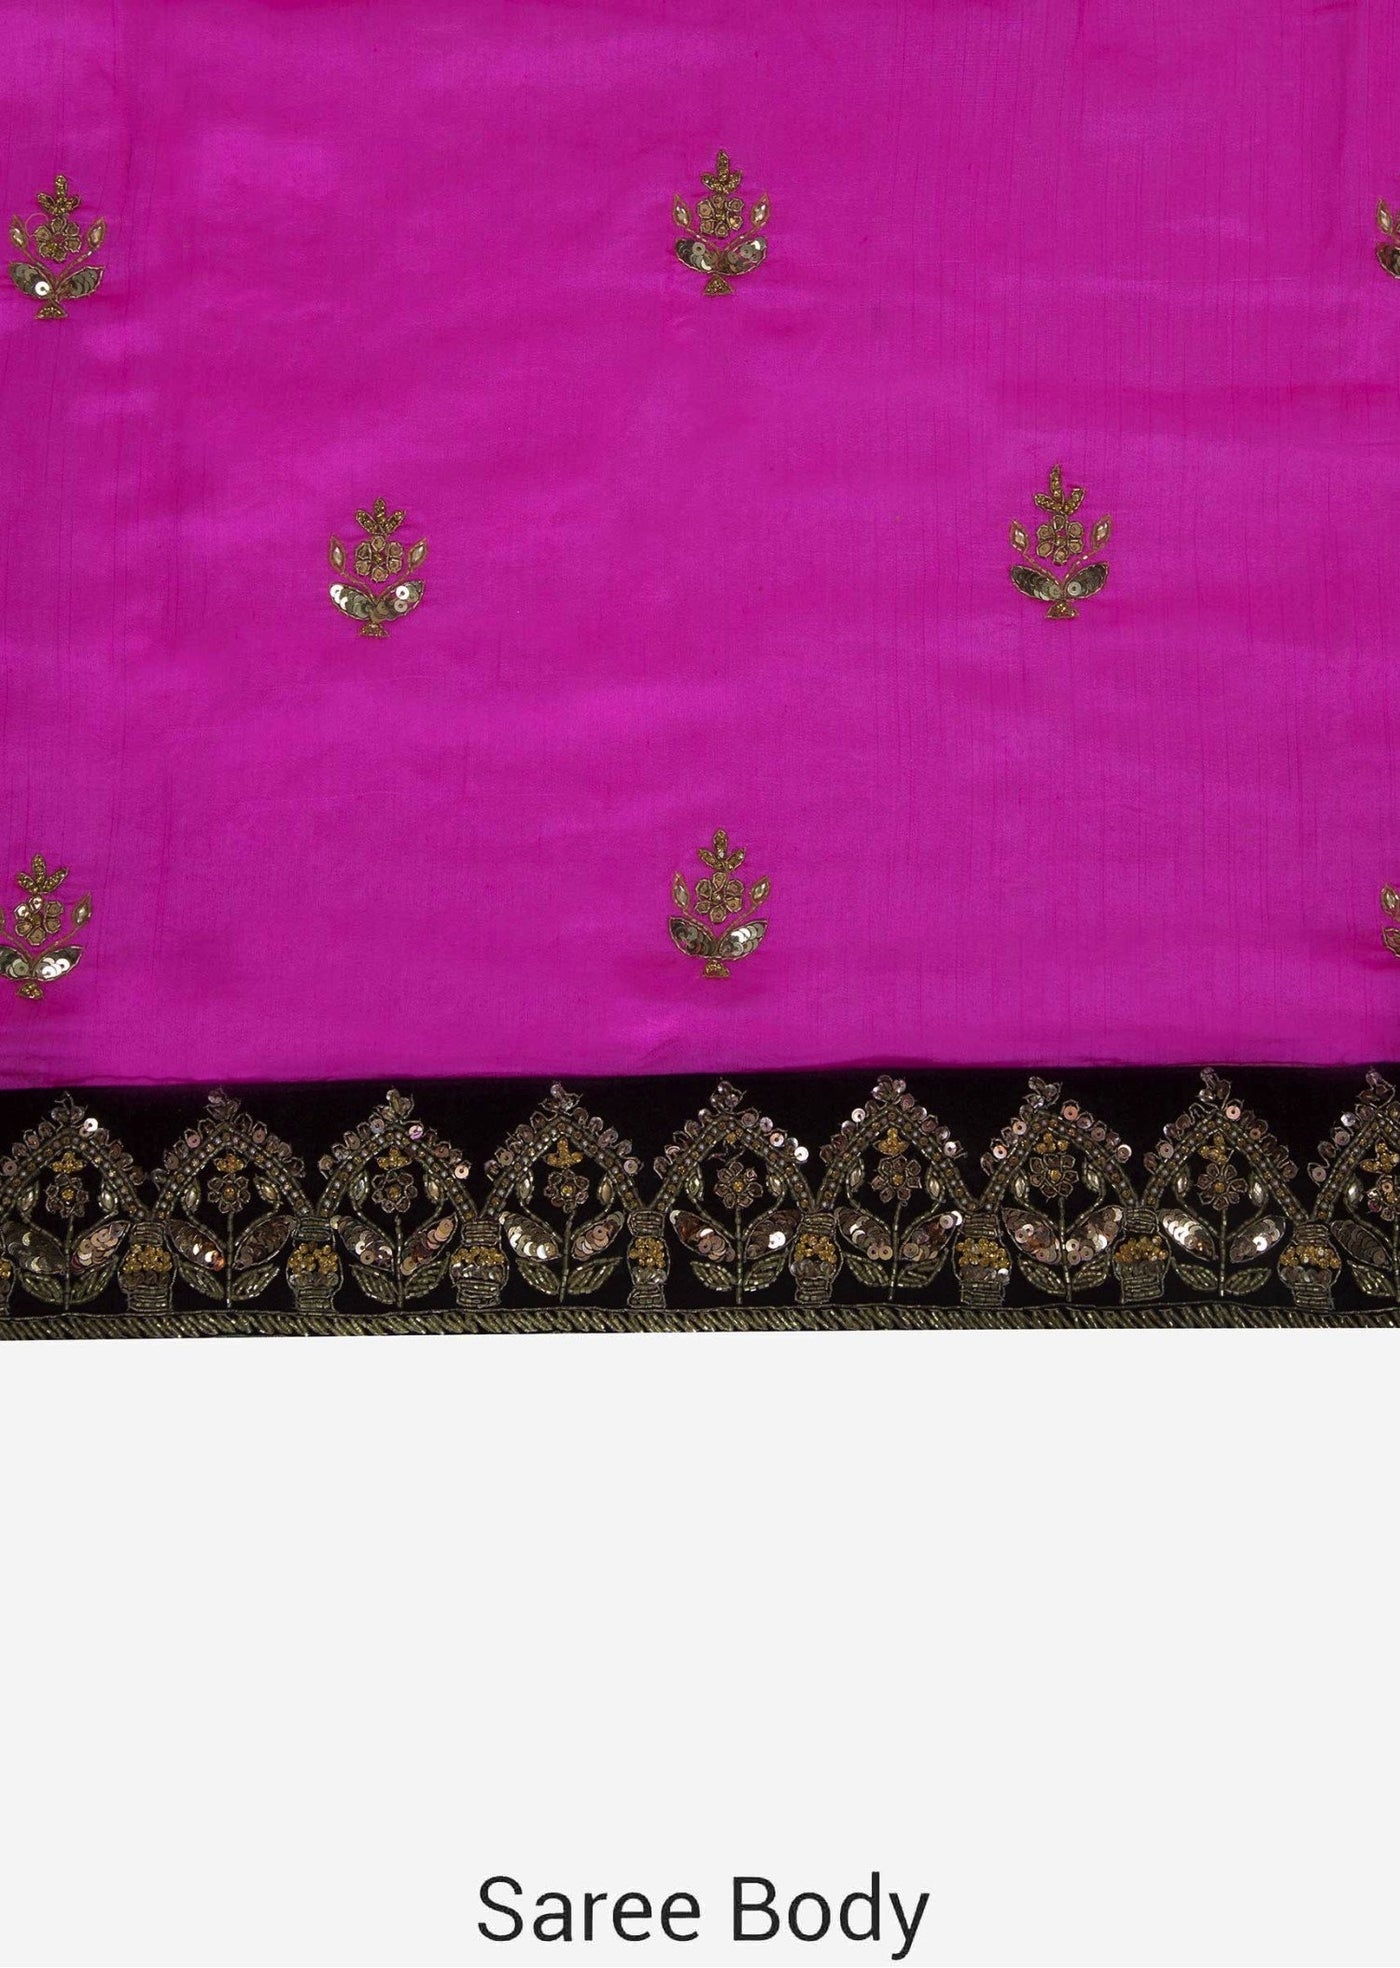 Fuchsia pink saree in silk with chariot motif embroidered border Indian Clothing in Denver, CO, Aurora, CO, Boulder, CO, Fort Collins, CO, Colorado Springs, CO, Parker, CO, Highlands Ranch, CO, Cherry Creek, CO, Centennial, CO, and Longmont, CO. NATIONWIDE SHIPPING USA- India Fashion X